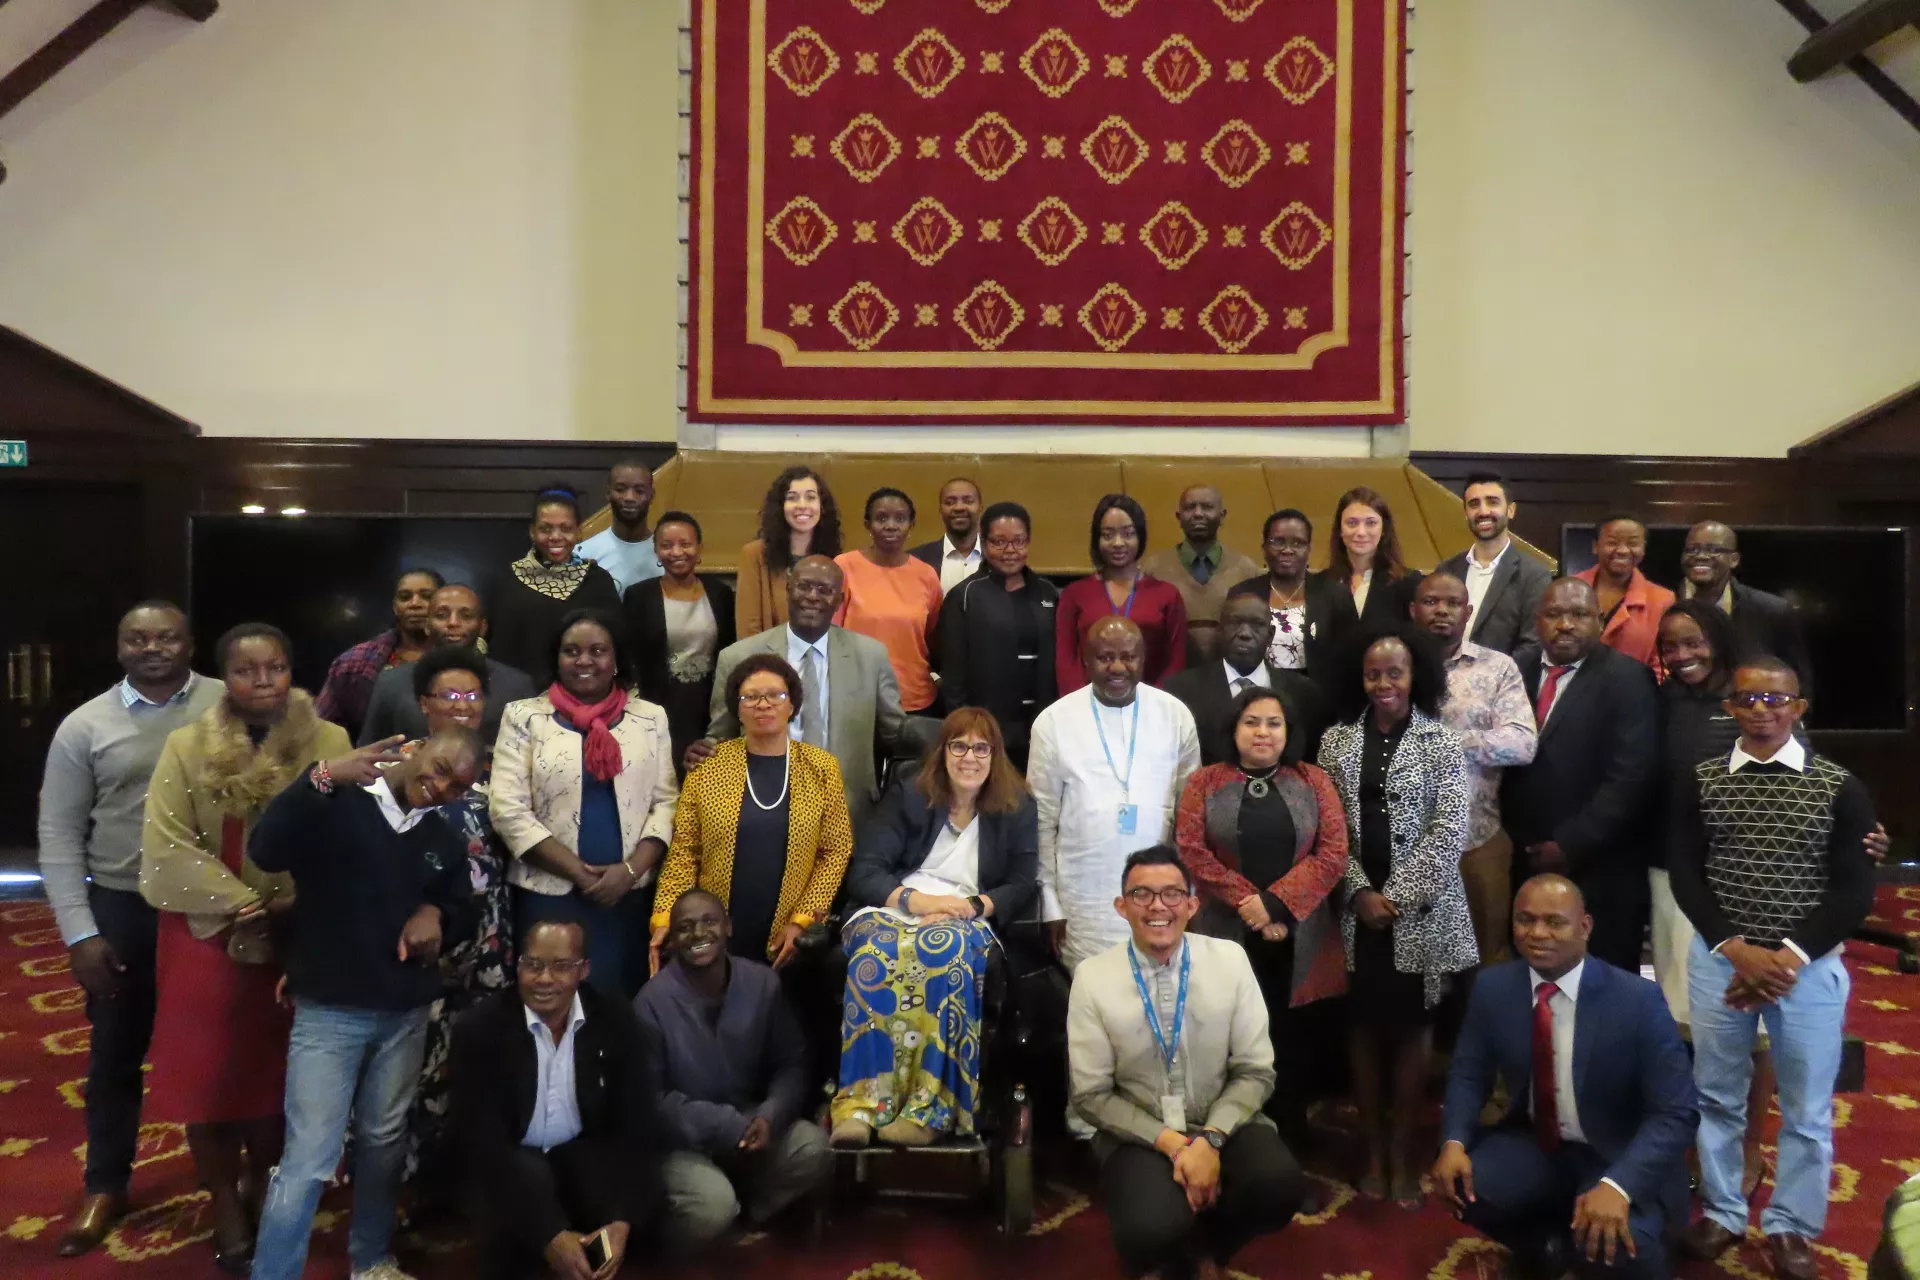 Group photo of the participants in the inception meeting in Nairobi, Kenya